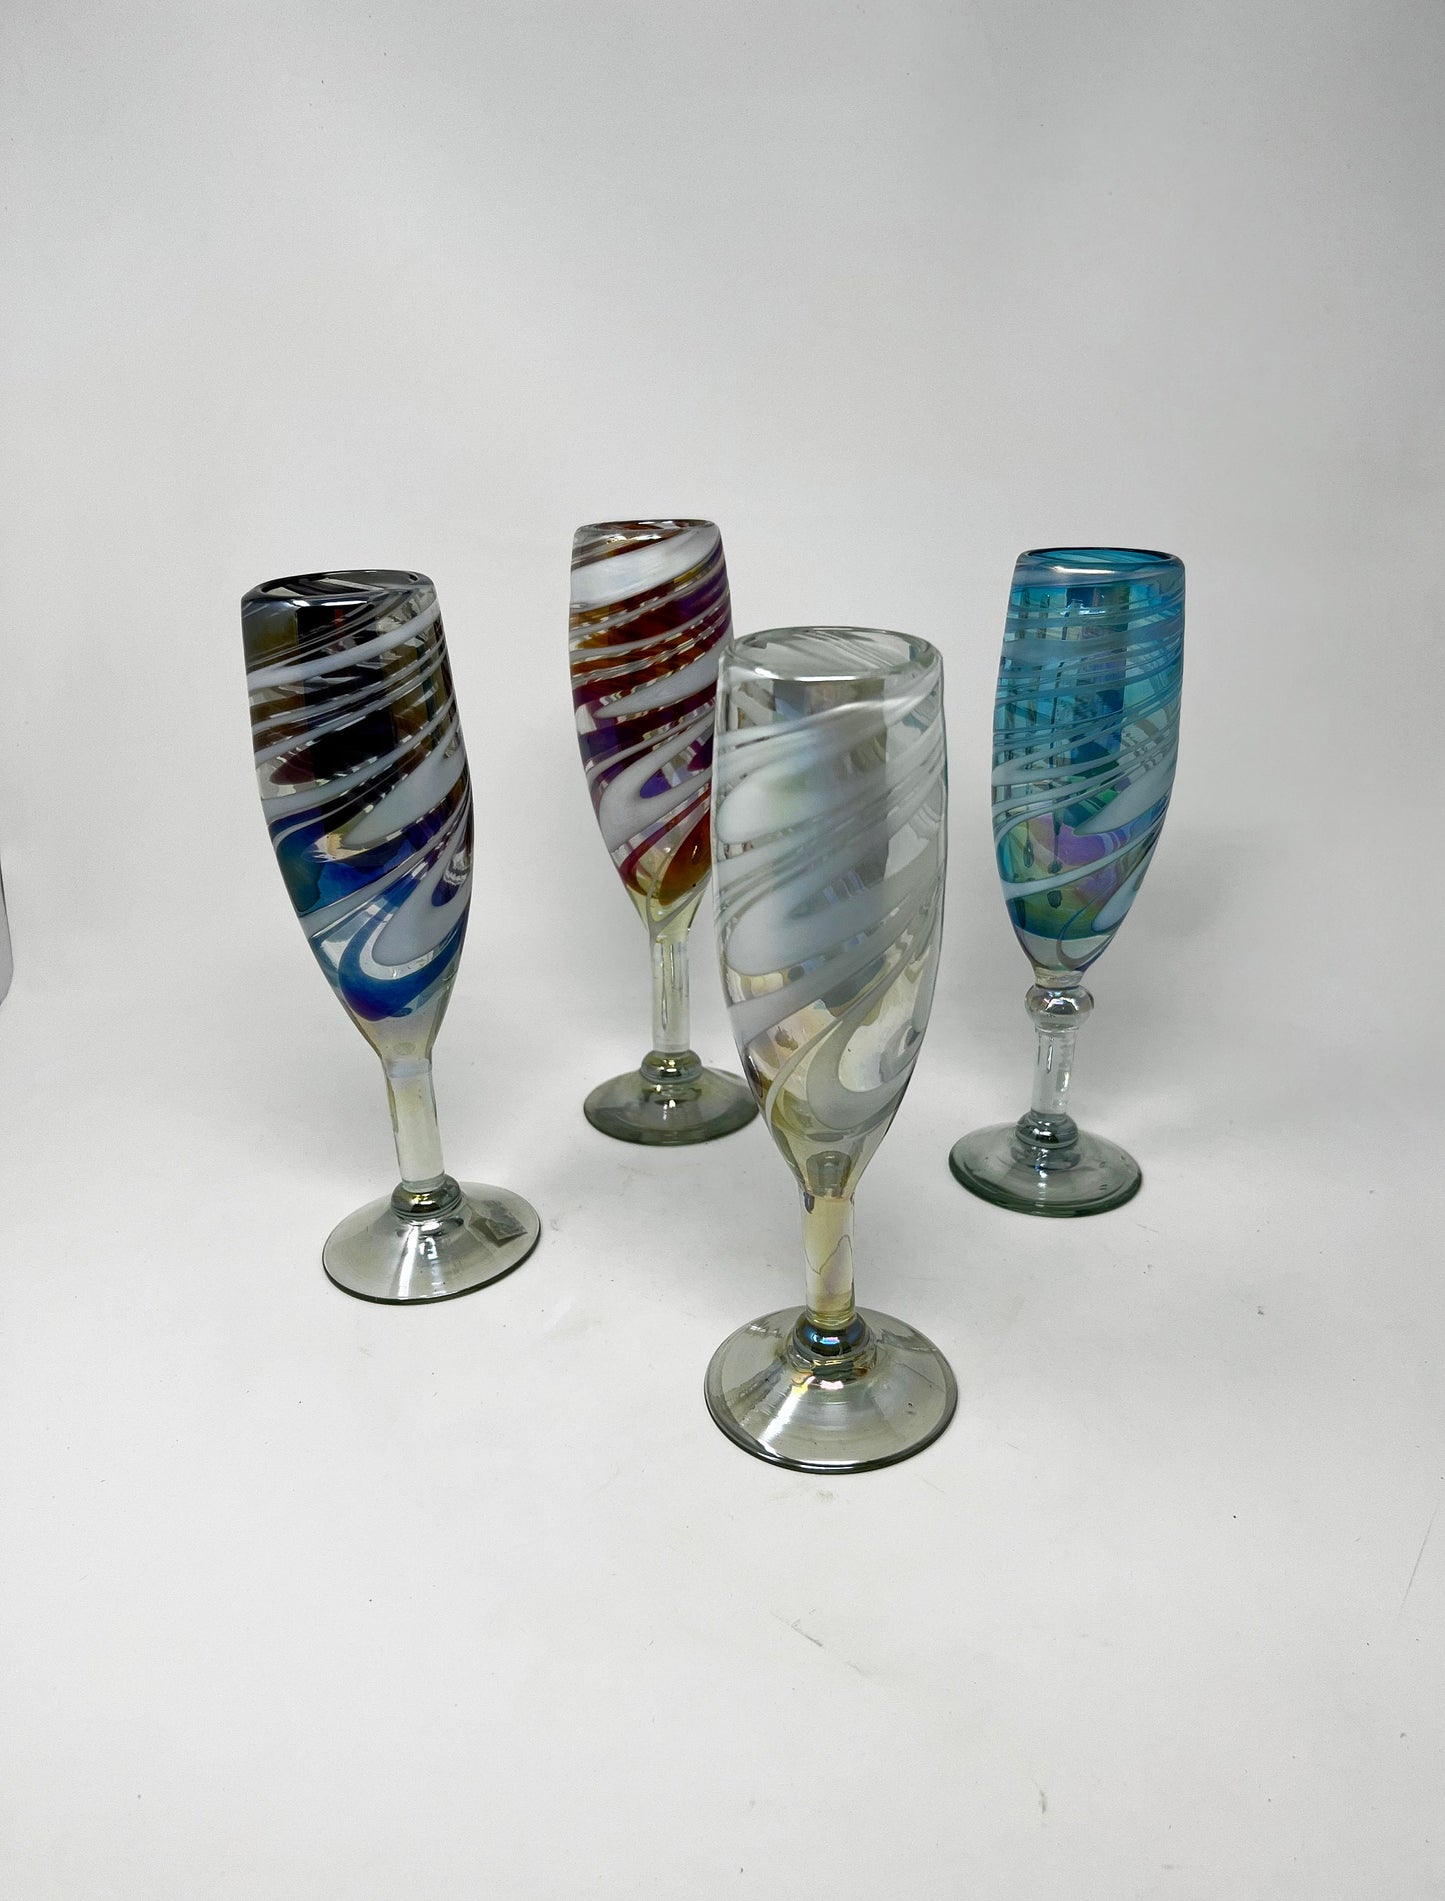 4 Hand Blown Glasses - Cotton Candy Collection (Iridescent)